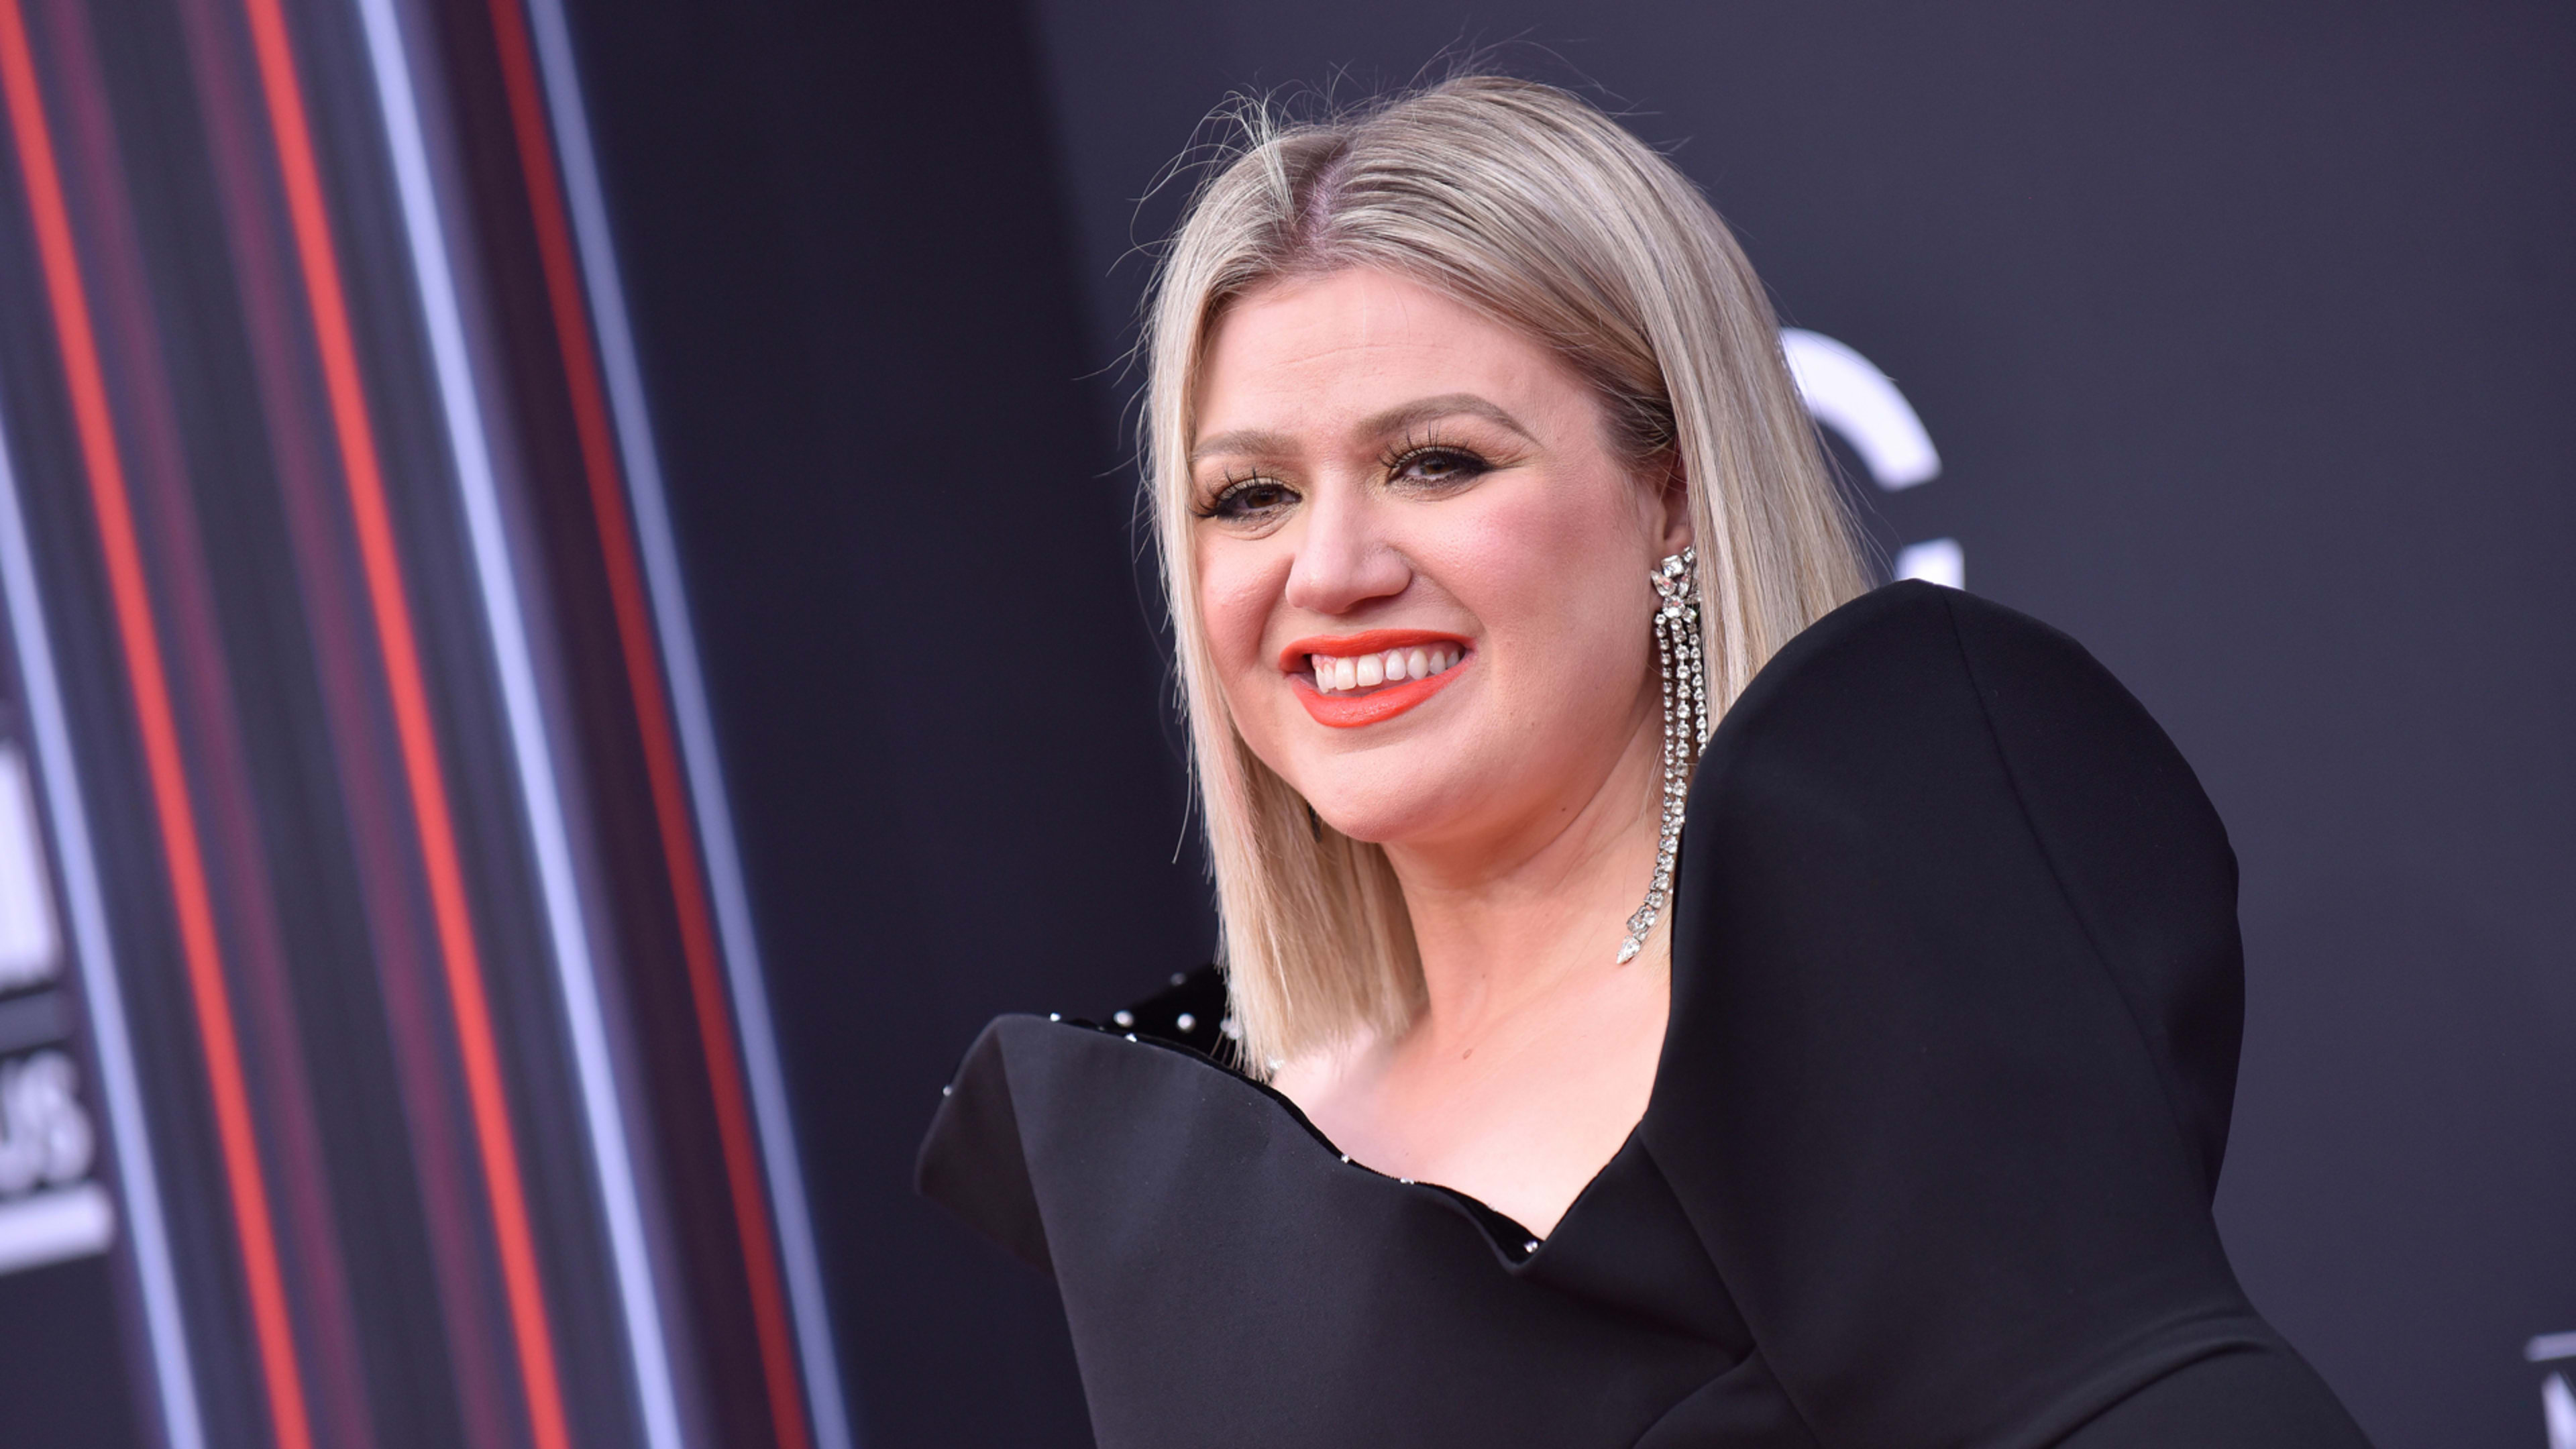 Kelly Clarkson proposes “a moment of action” on guns at the Billboard Music Awards